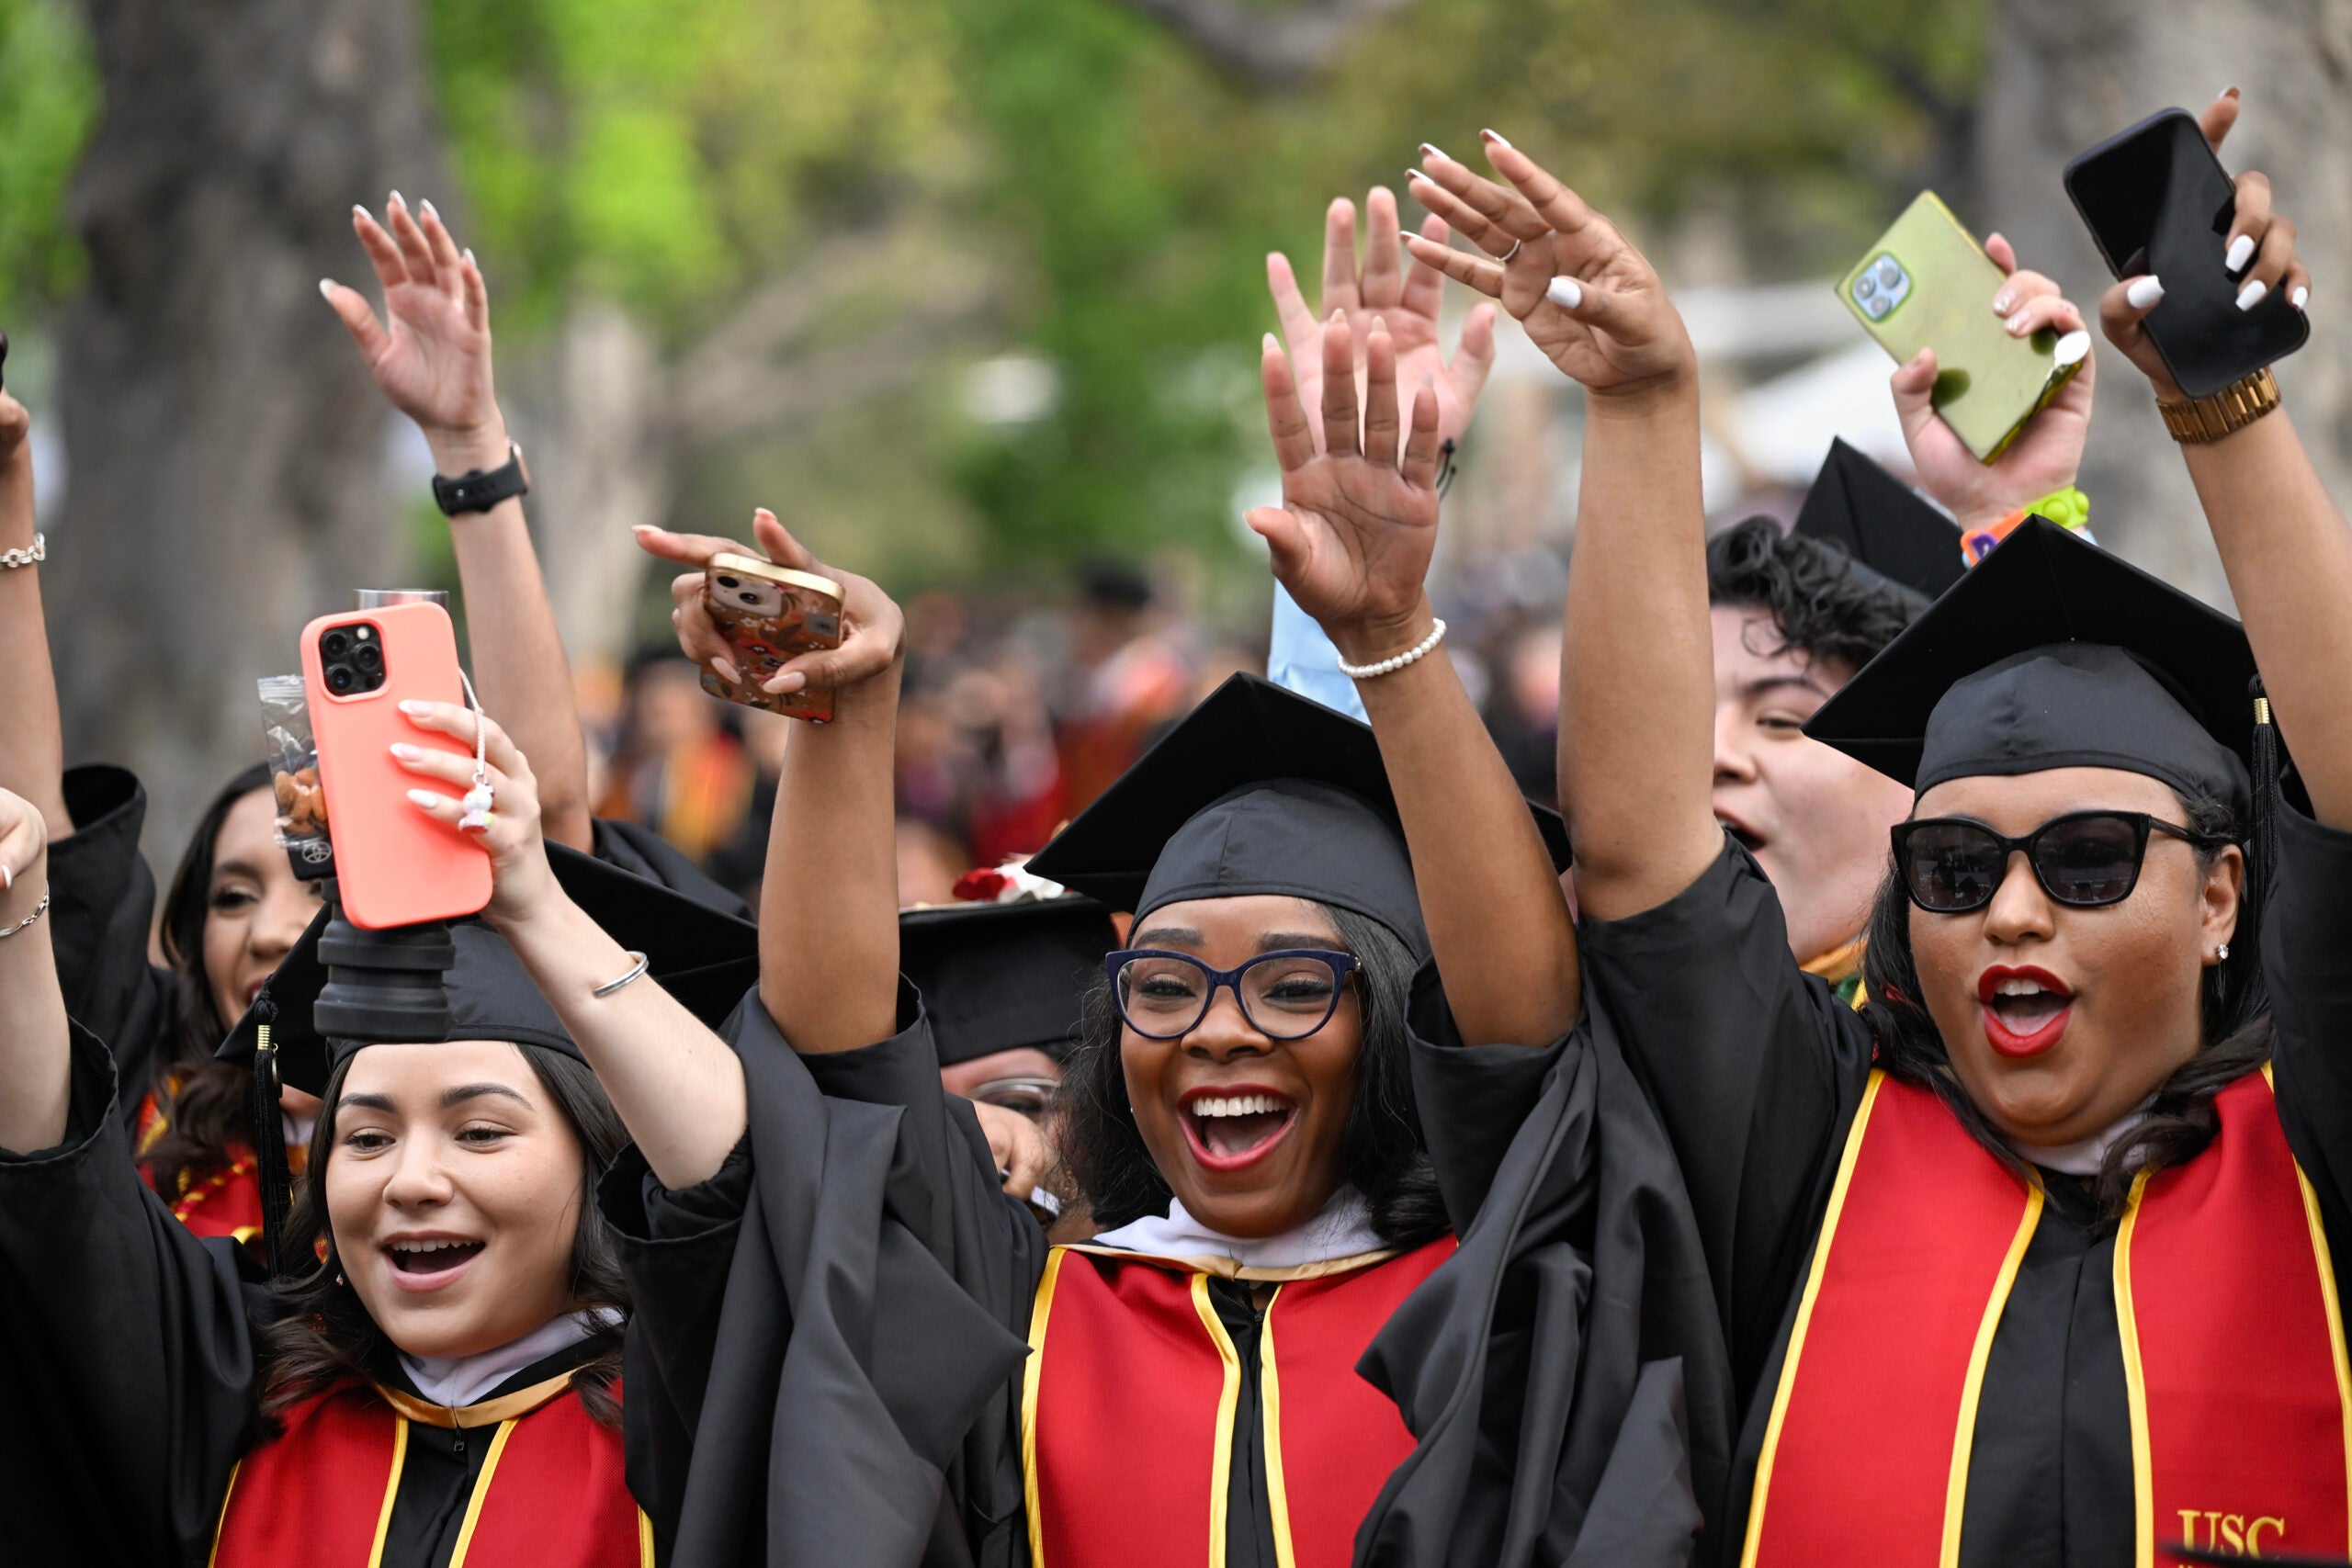 Graduates celebrate during the 140th commencement ceremony at the University of Southern California, May 12, 2023. (Photo/Gus Ruelas)